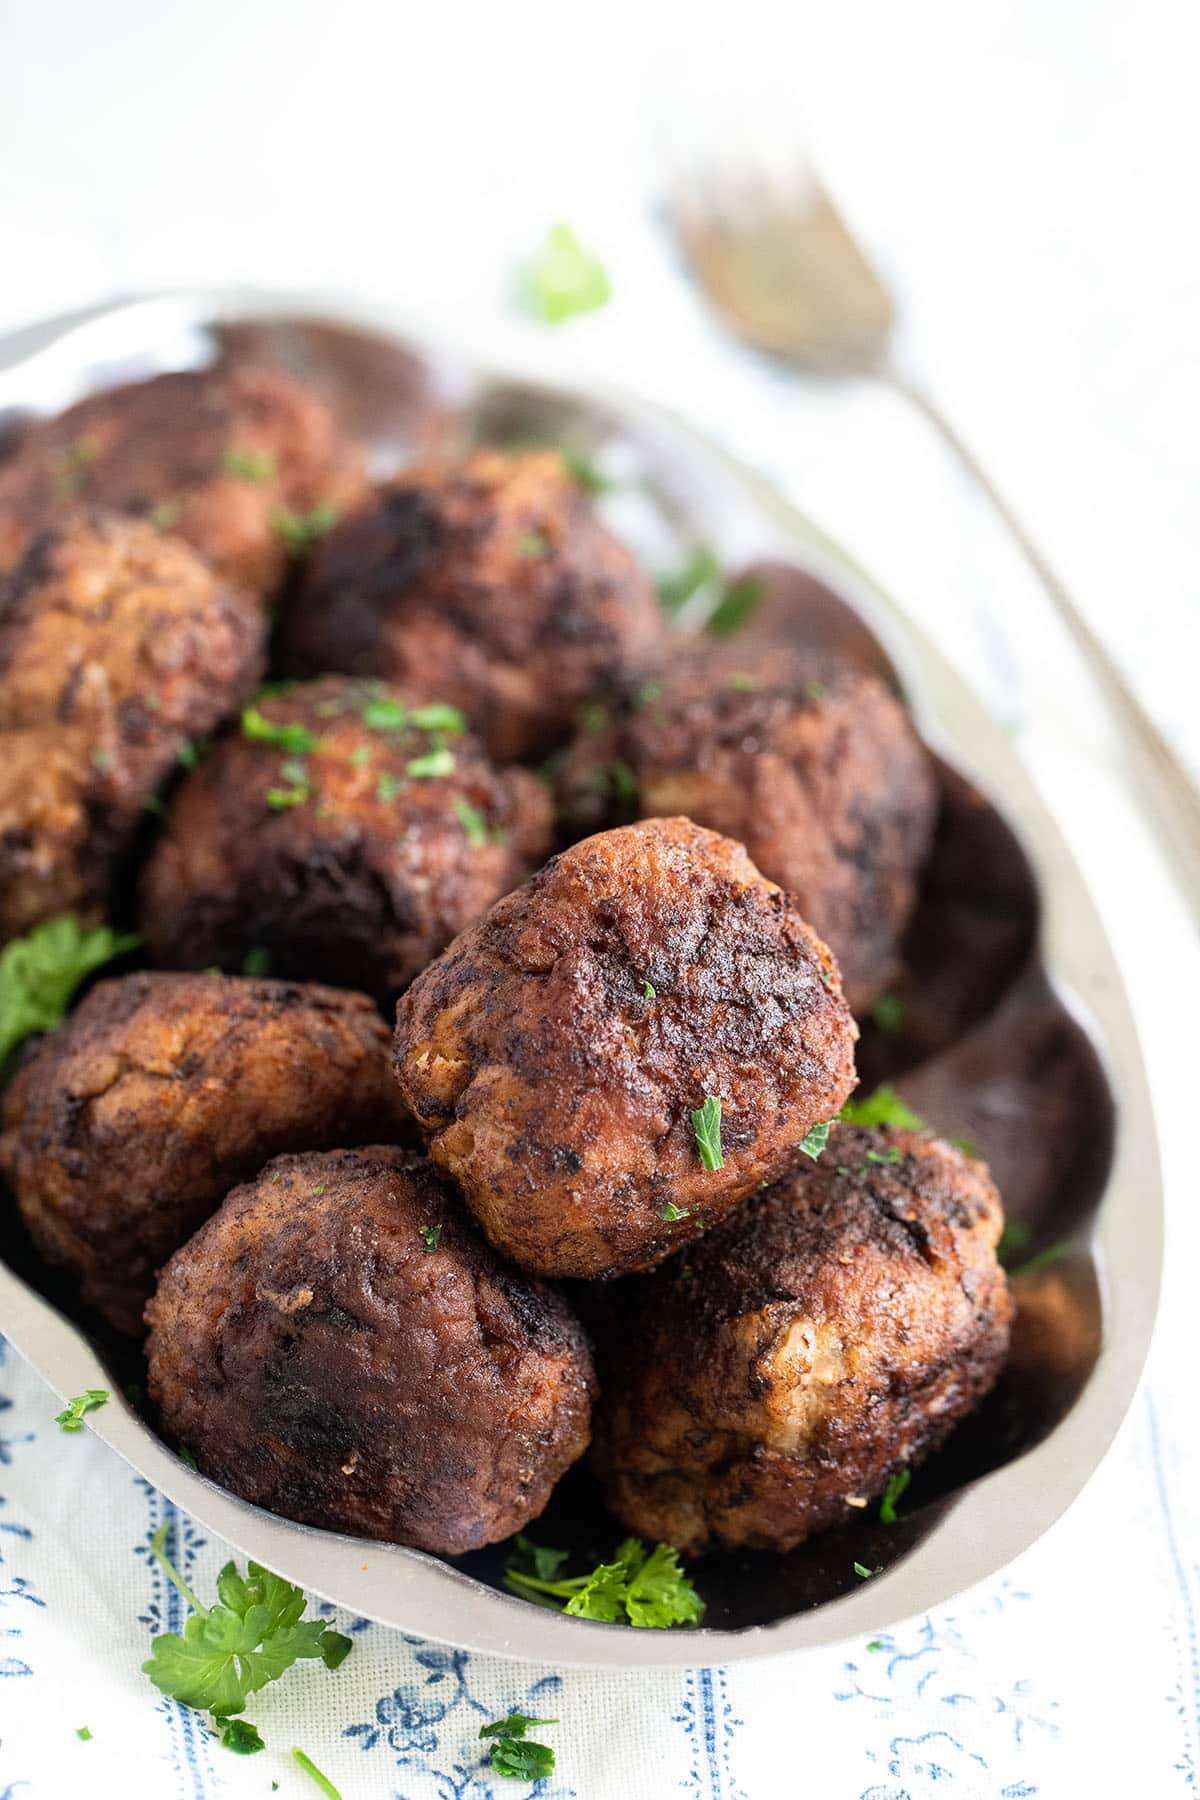 round meatballs made with pork and sprinkled with parsley.